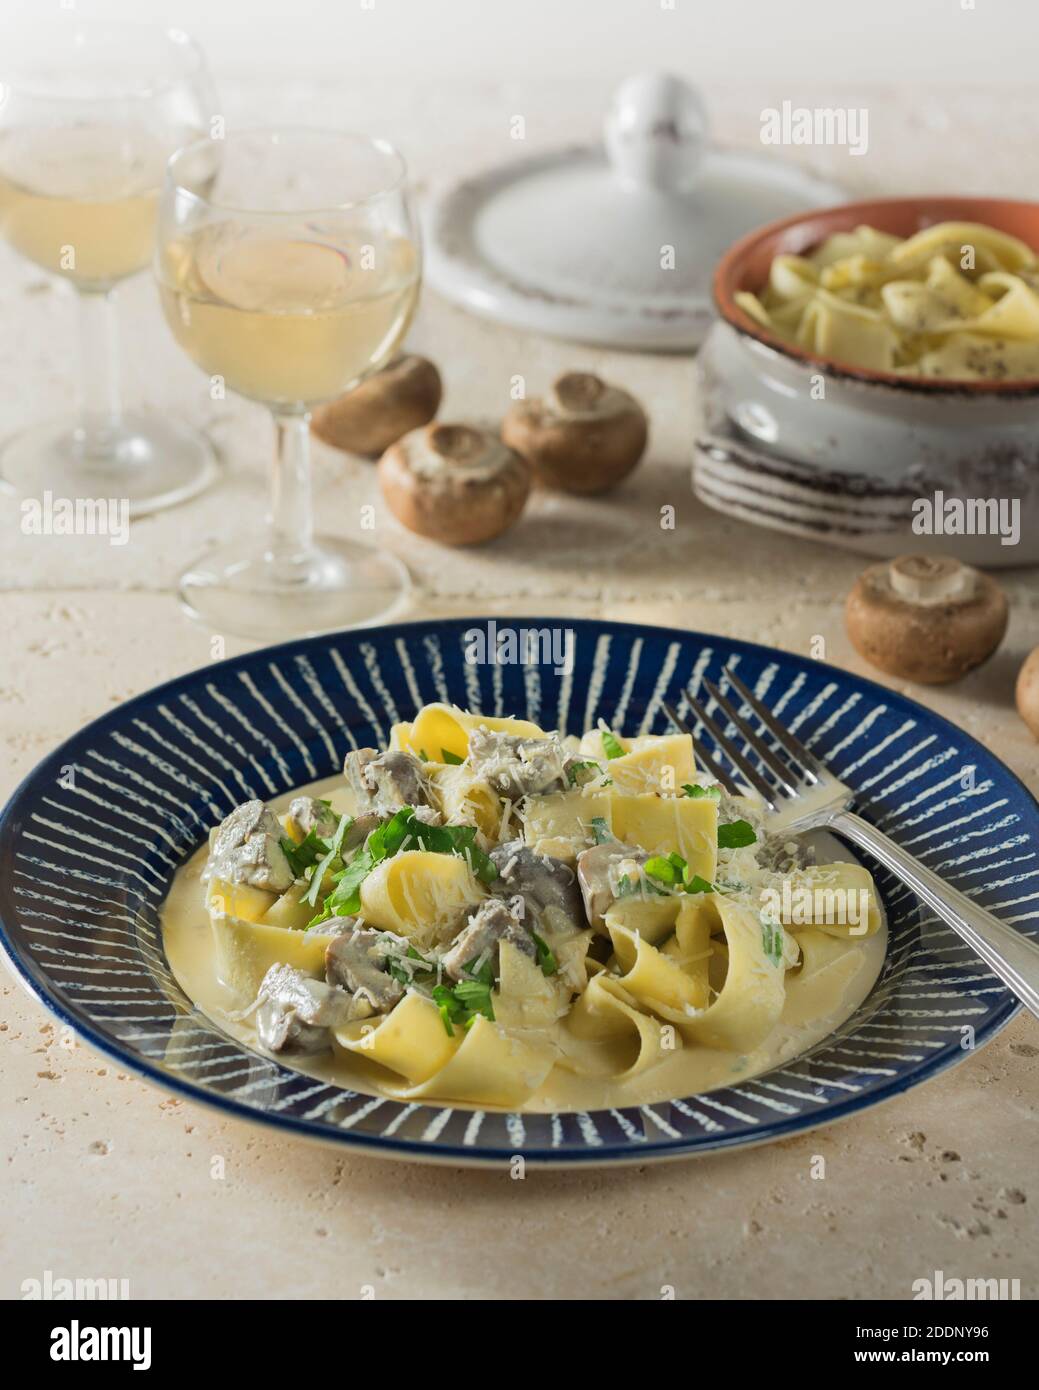 Pasta ai funghi. Pappardelle with mushrooms. Italy Food Stock Photo